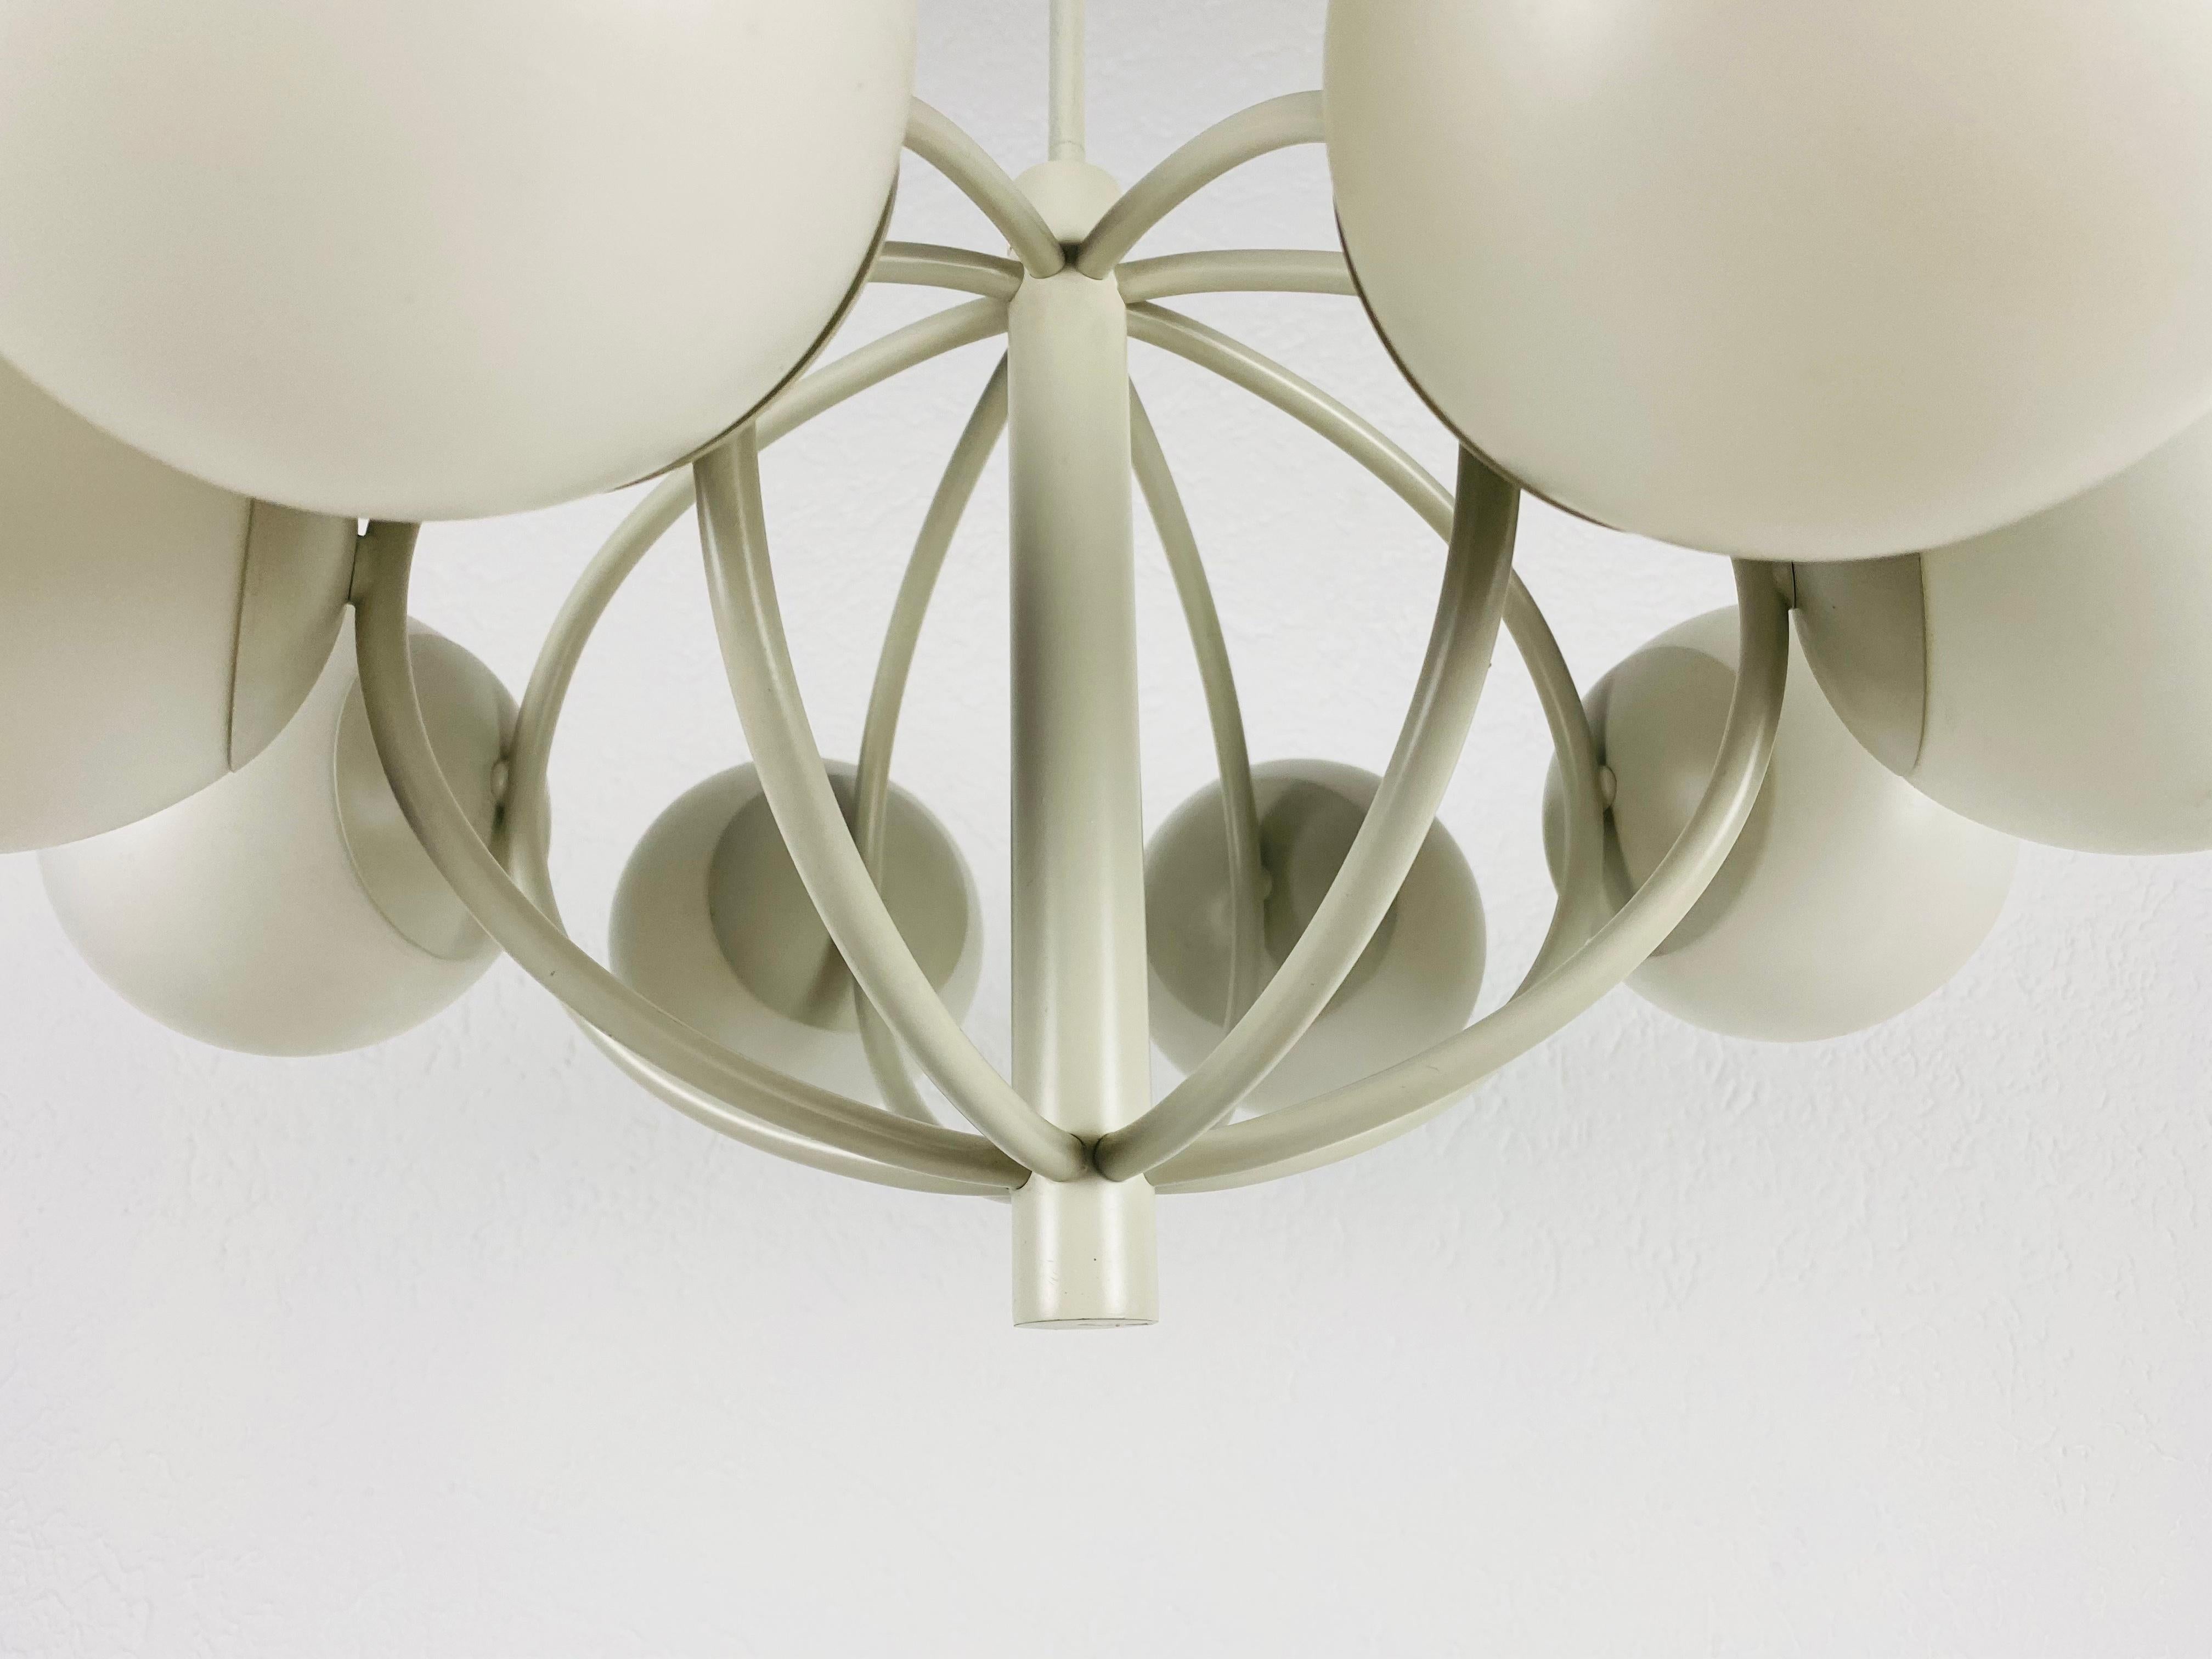 Large Kaiser Midcentury White 8-Arm Space Age Chandelier, 1960s, Germany For Sale 3